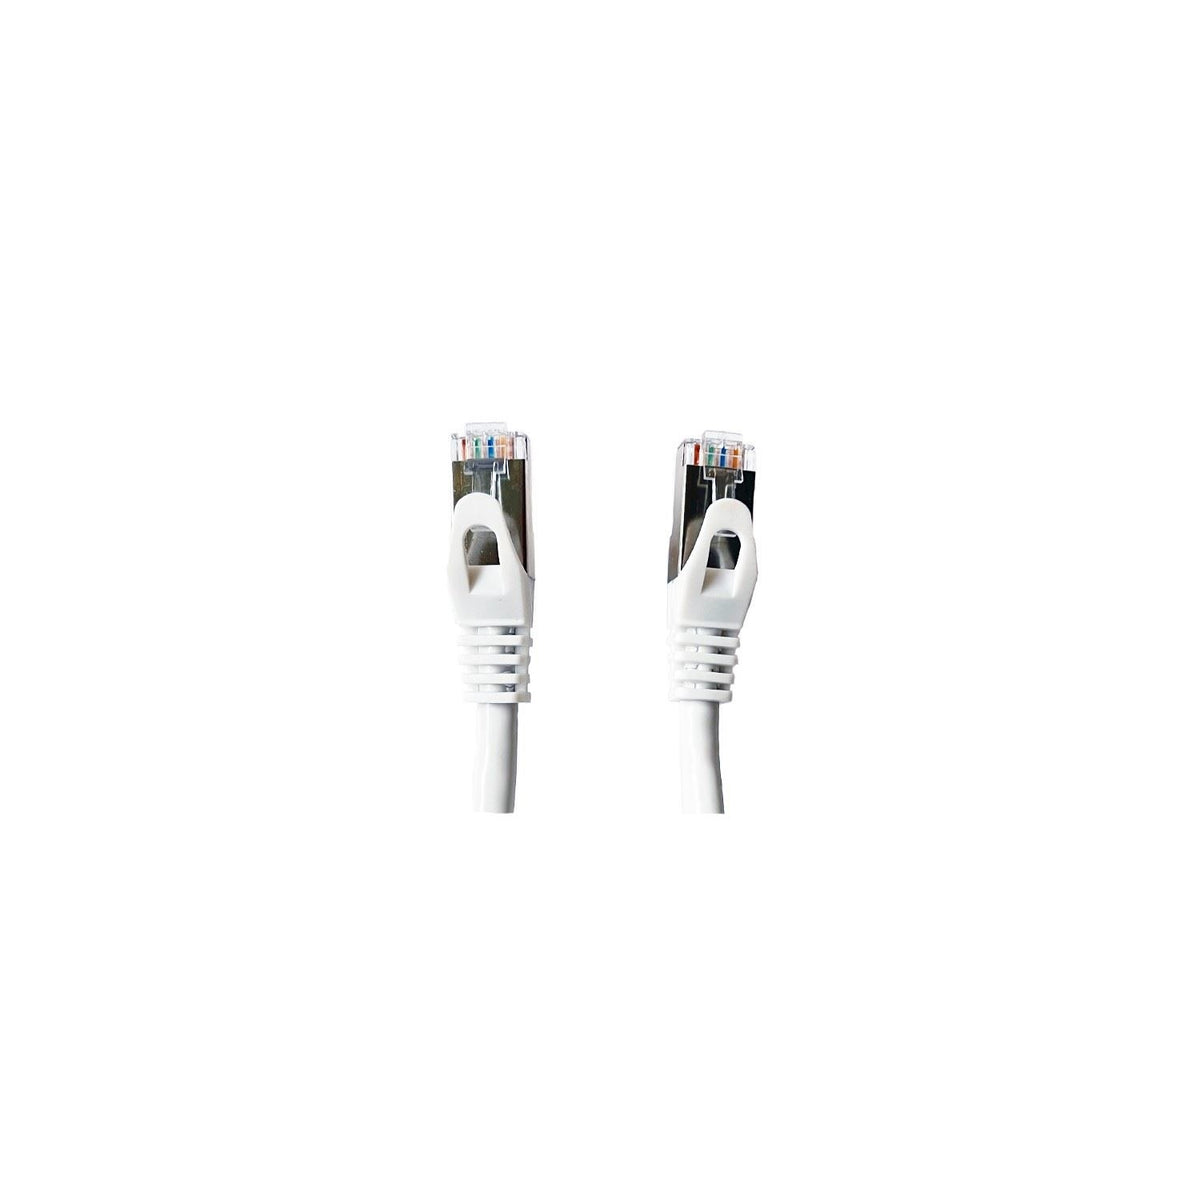 Sinox Cat7 2M RJ45 Ethernet Cable - White | XC78702 from Sinox - DID Electrical